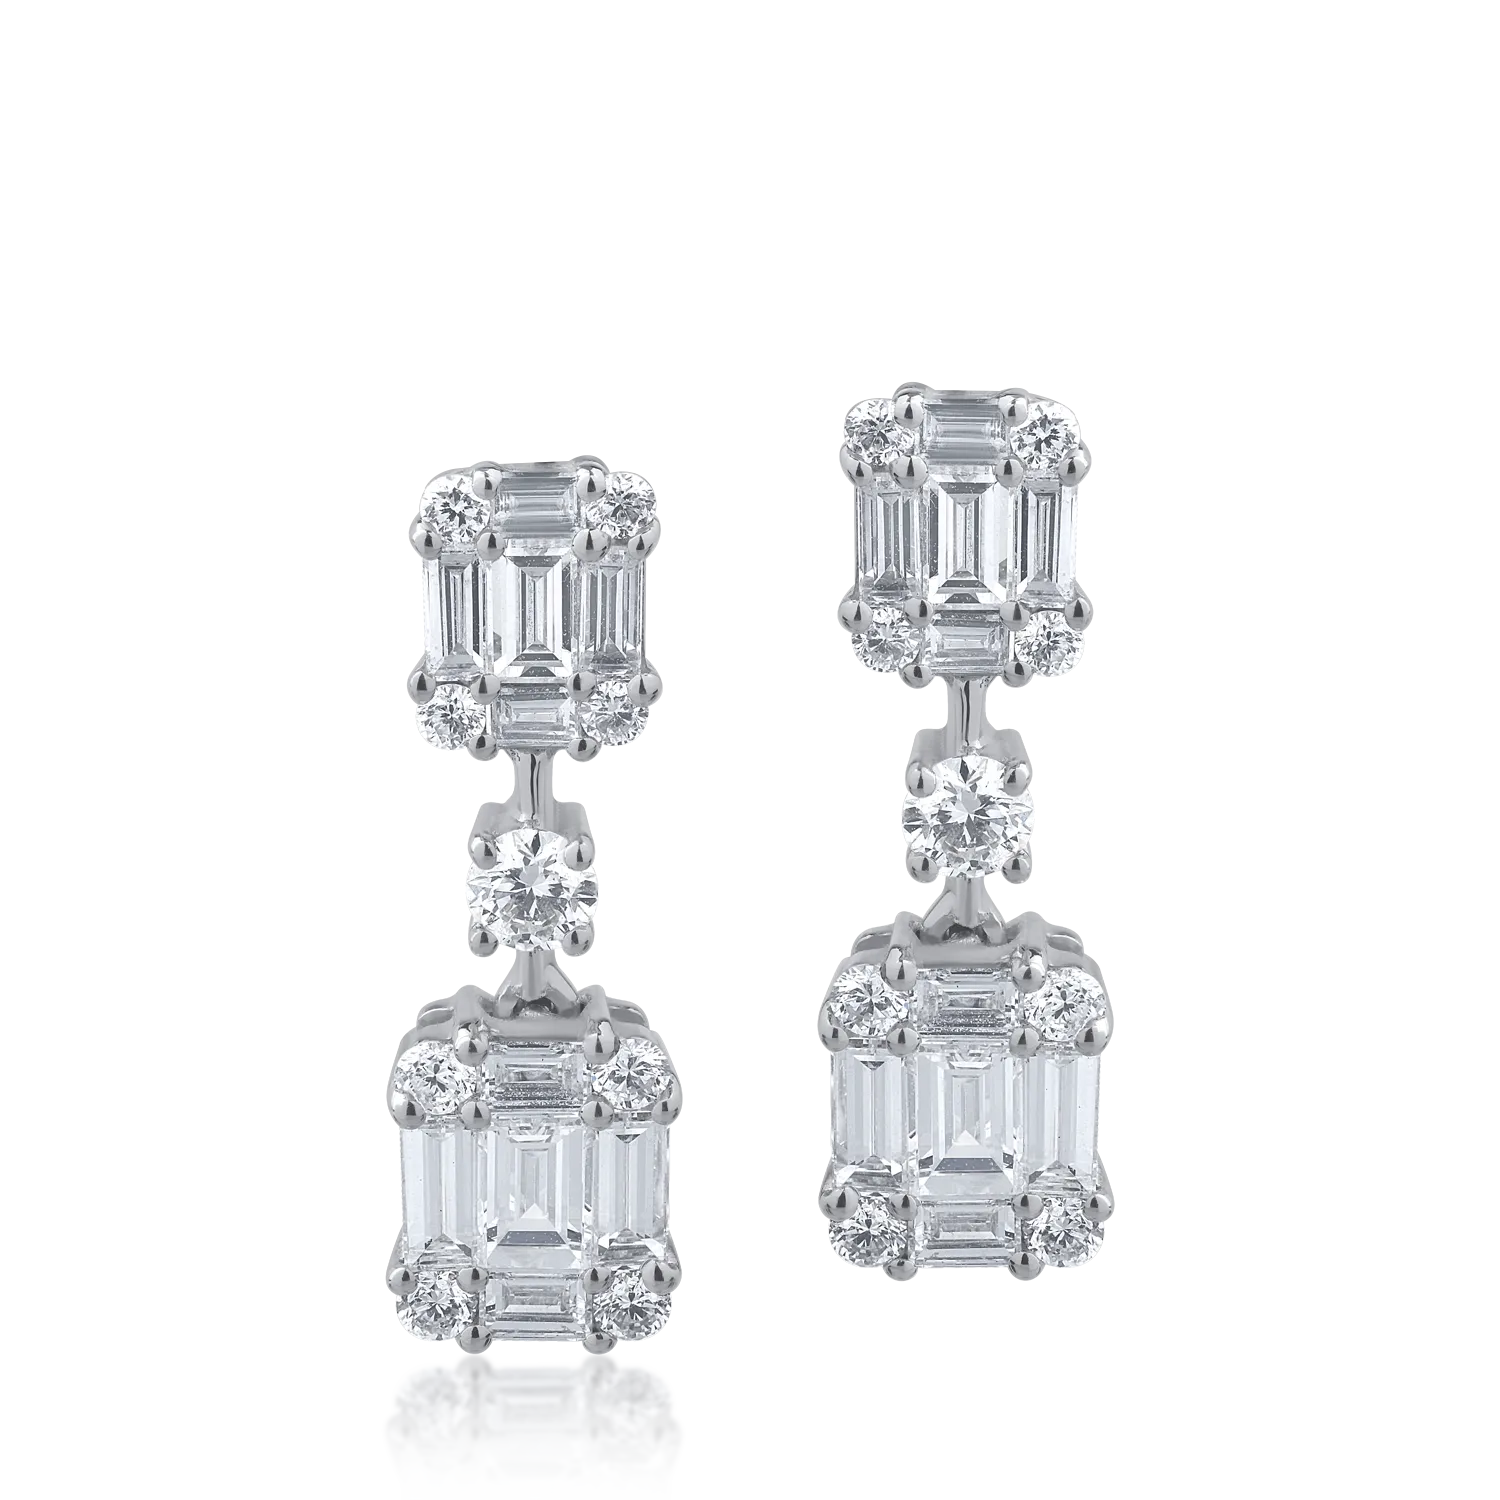 18K white gold earrings with 1.79ct diamonds